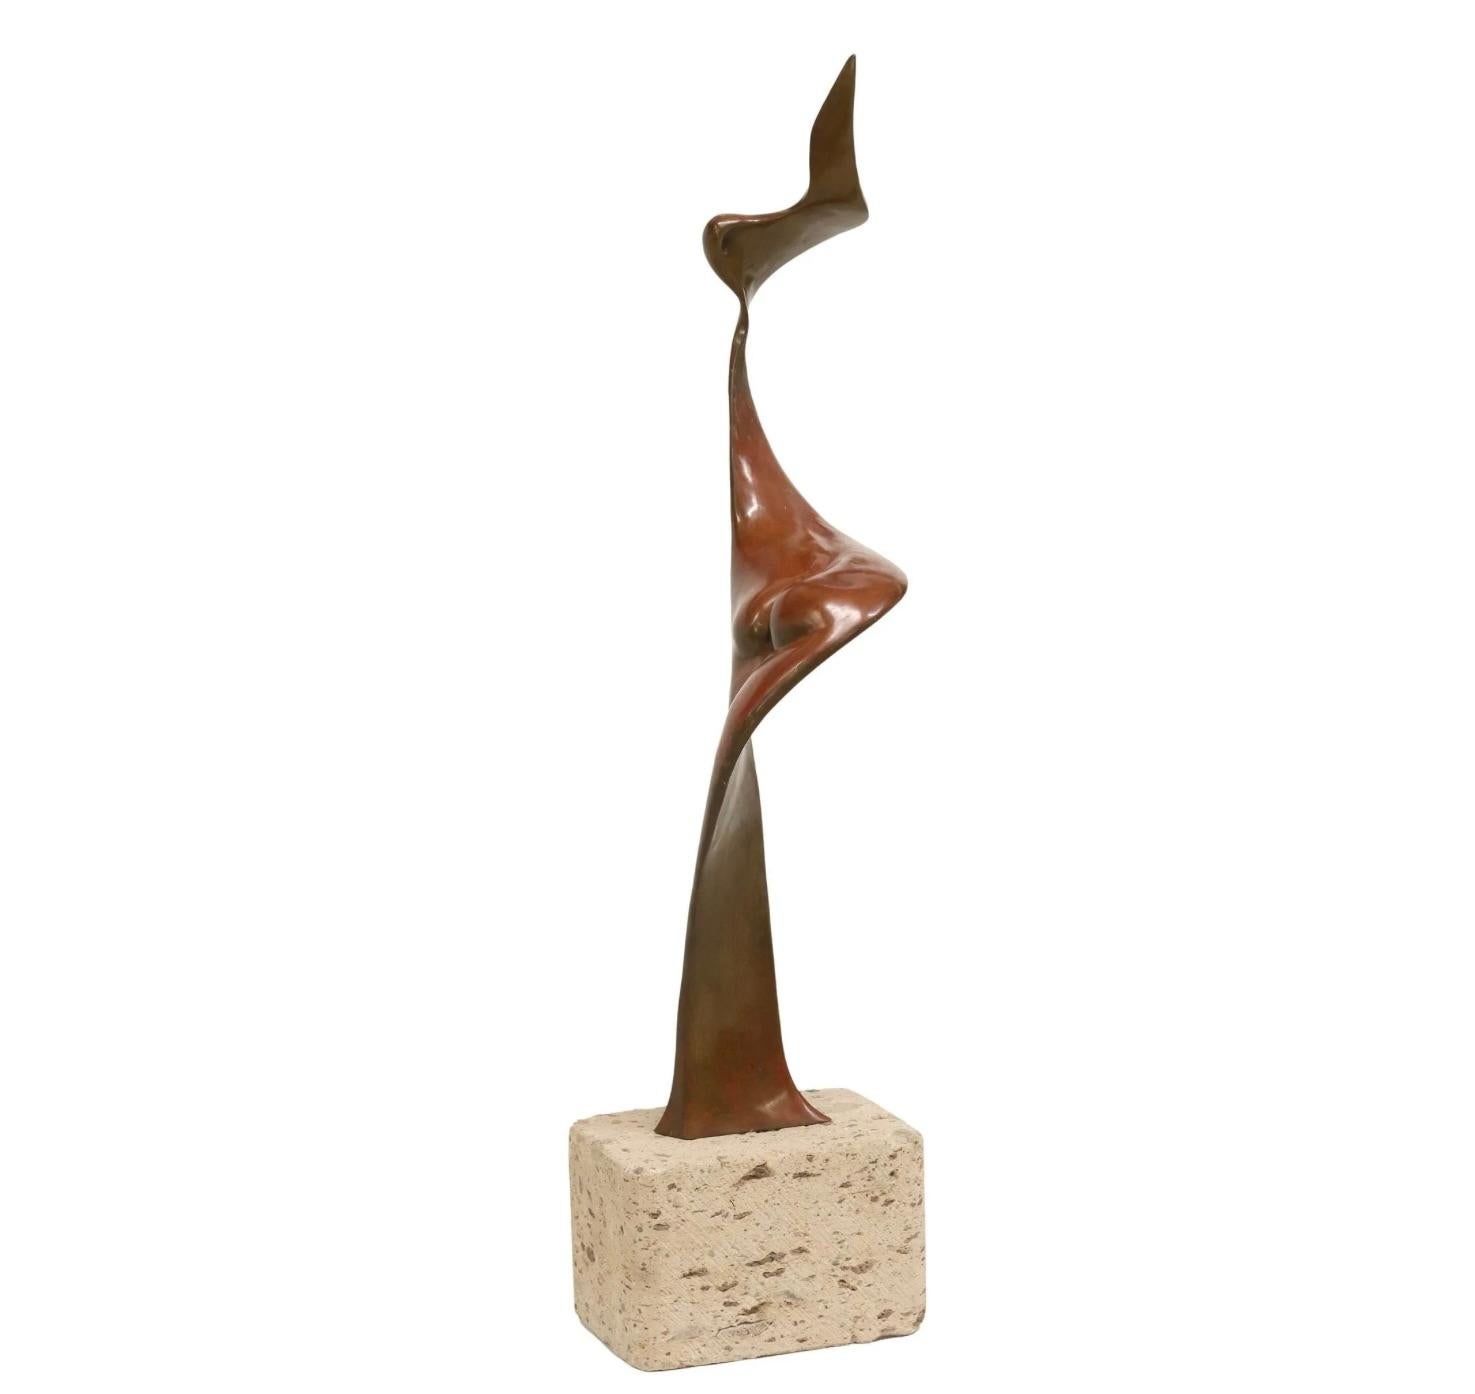 A wonderful bronze abstract in the form of a female nude mounted on a terrazzo base. It is by the noted Mexican artist Jonas Gutierrez Castillo. It is signed Jonas 99 PA near the base. PA stands for Pruebas de Artista or Artist's Proof. The bronze